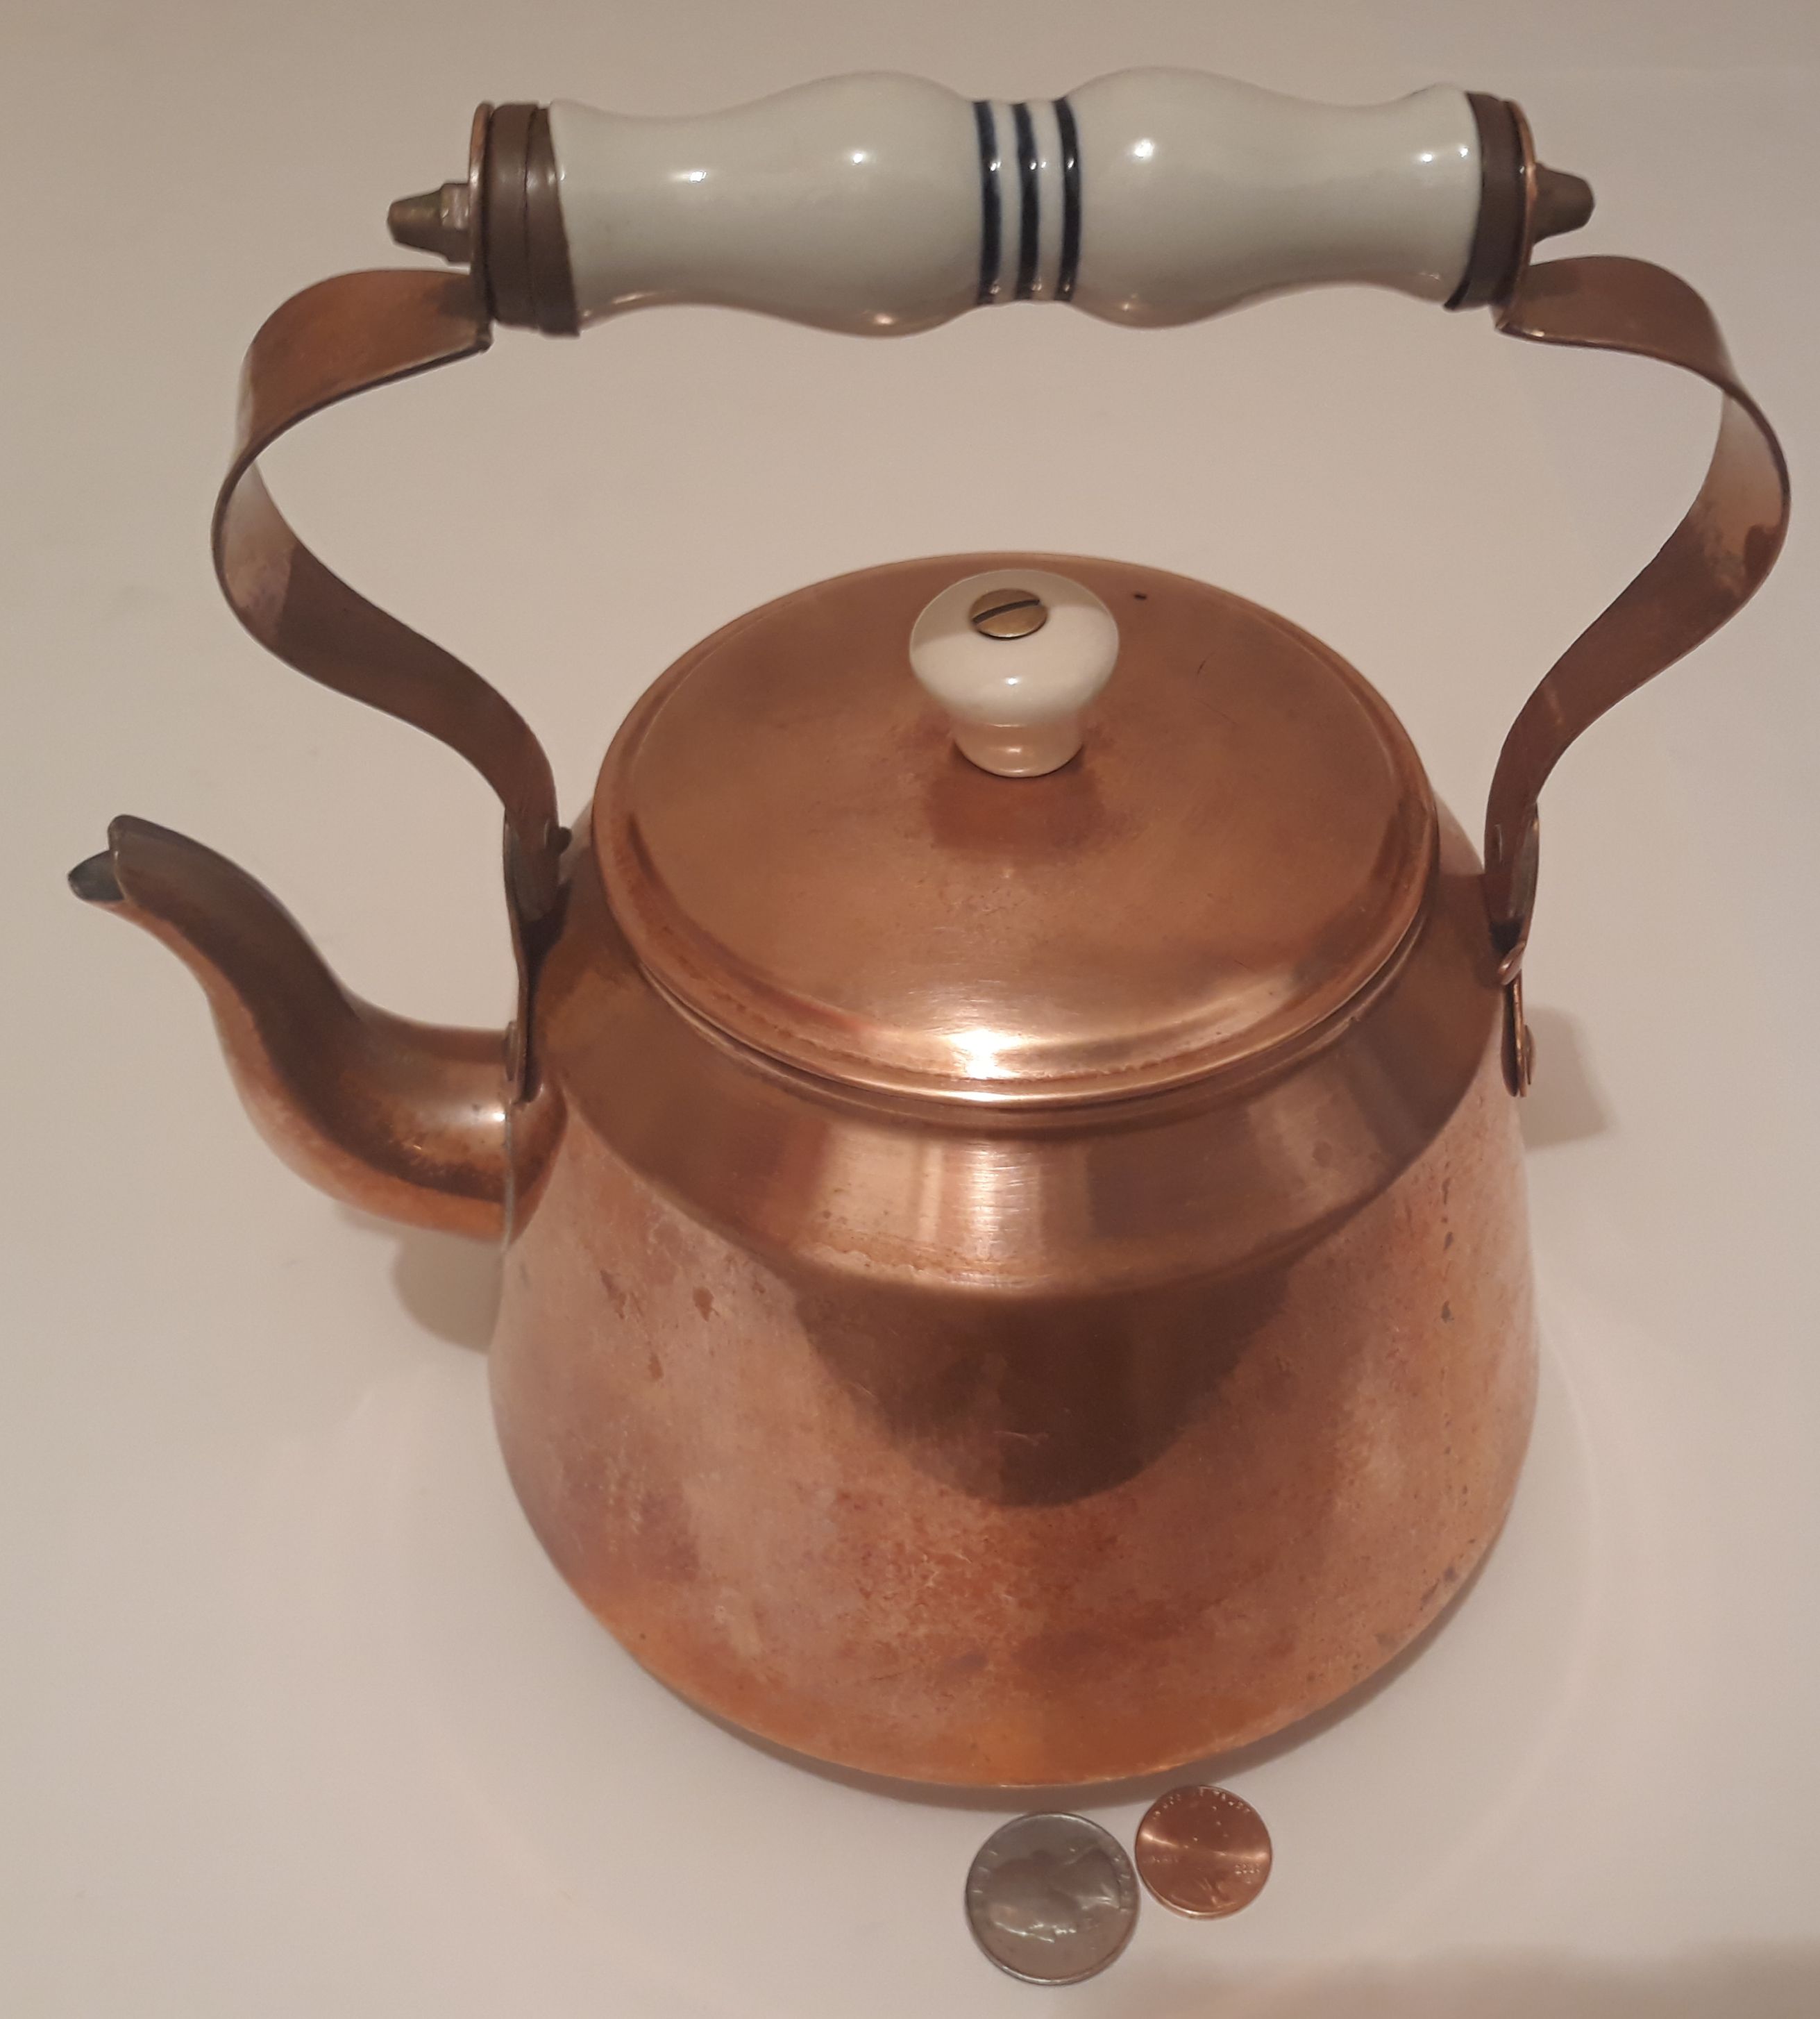 Vintage Metal Copper and Brass Tea Pot, Tea Kettle, 9" x 8", Kitchen Decor, Shelf Display, This Can Be Shined Up Even More